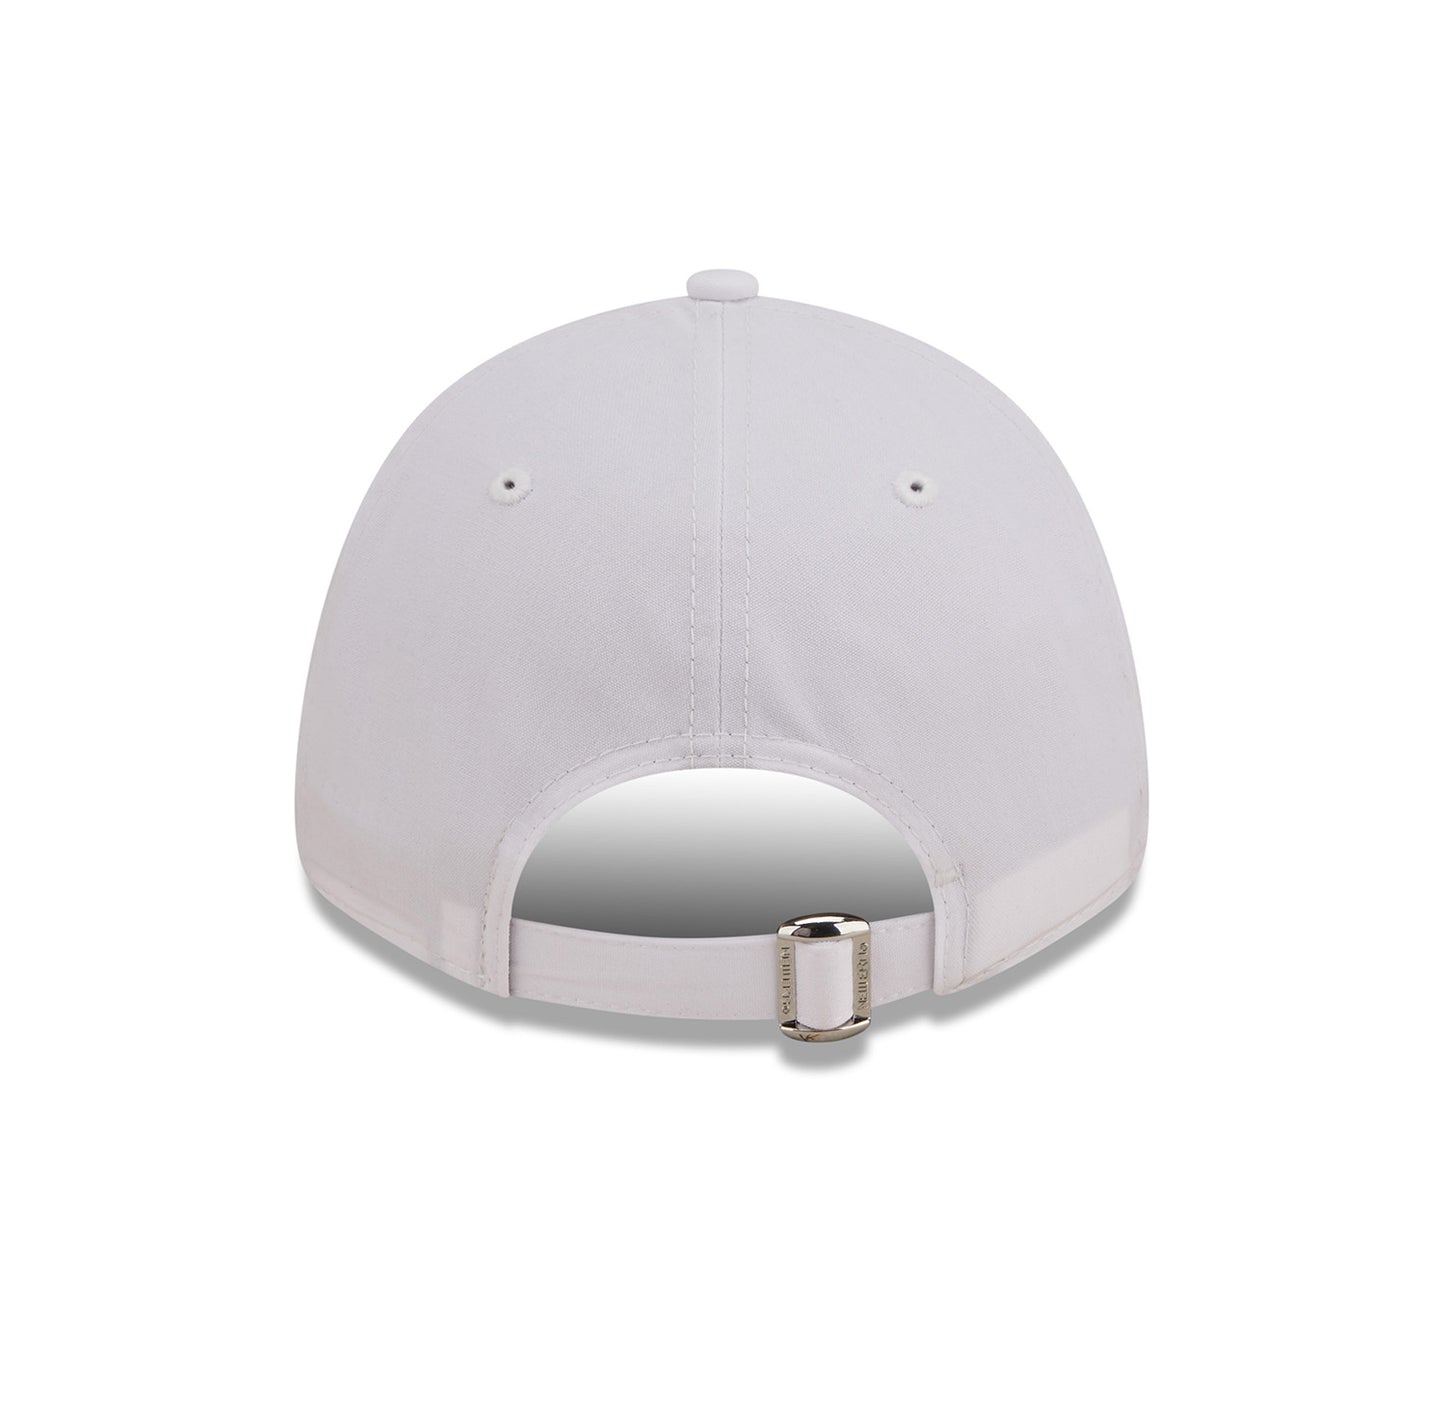 Los Angeles Lakers 9FORTY New Era Cap white REPREVE